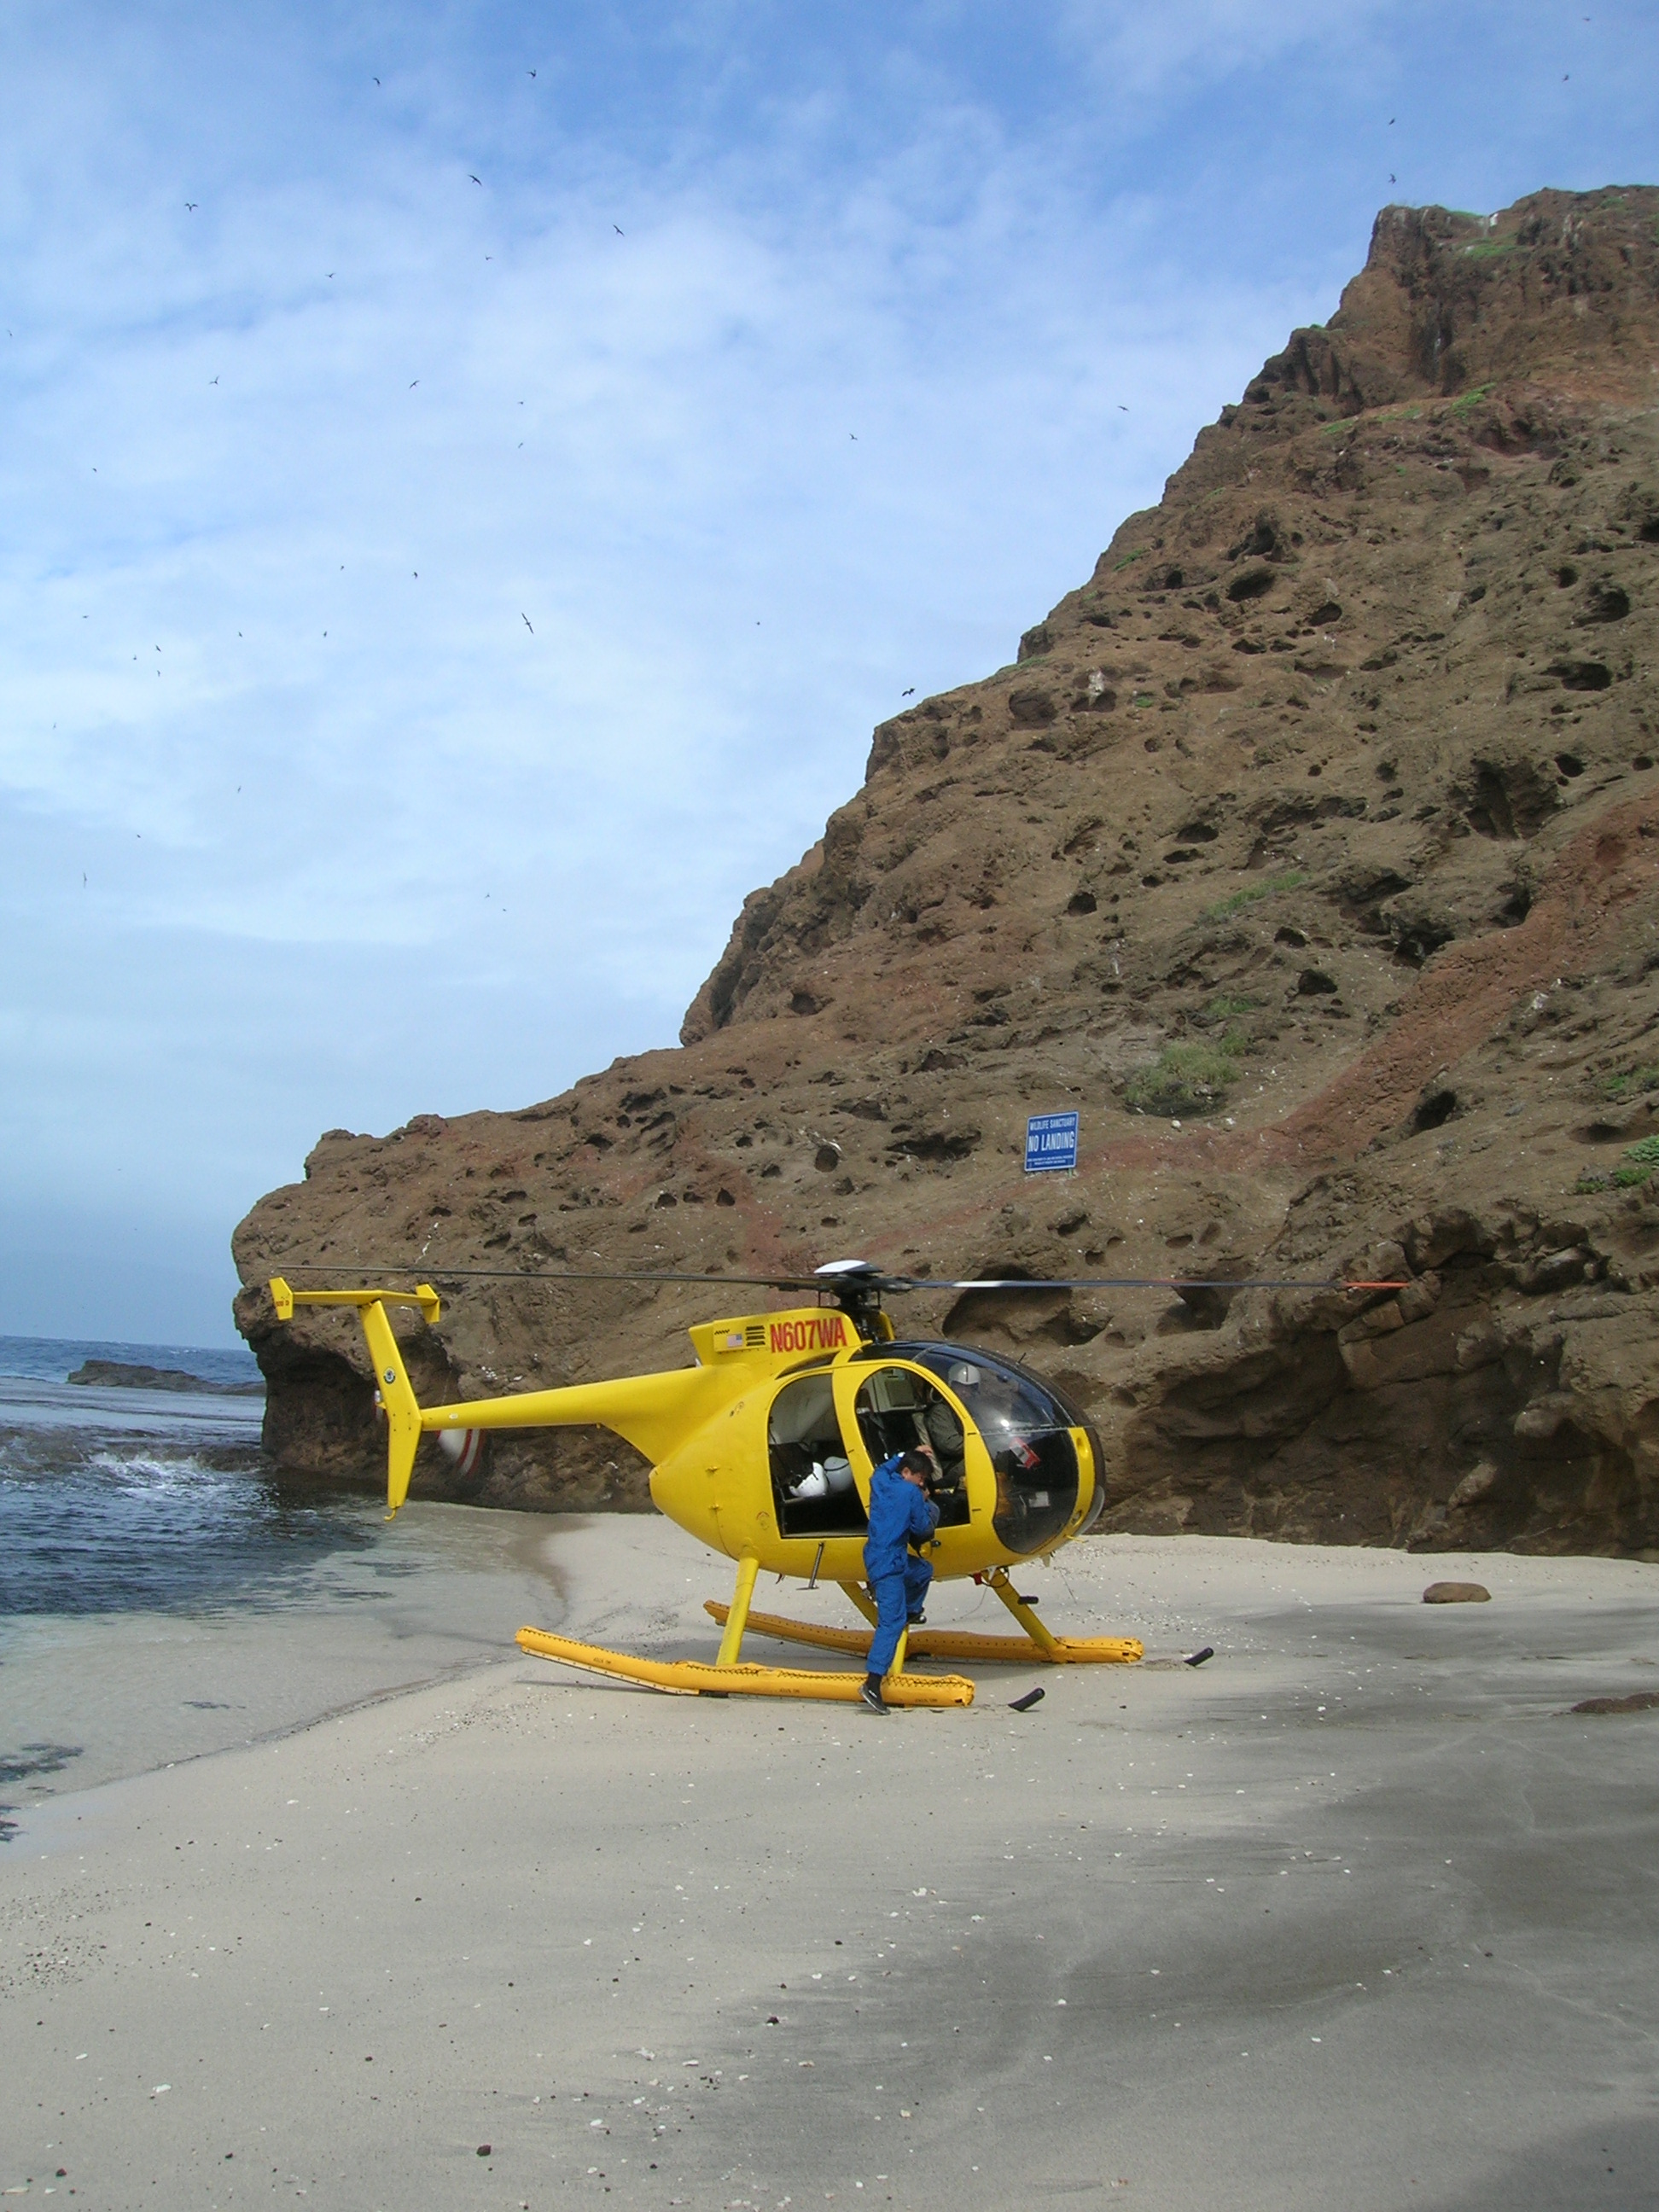 https://upload.wikimedia.org/wikipedia/commons/c/c9/Starr_060228-6234_Yellow_helicopter_on_the_beach_at_Moku_Manu.jpg